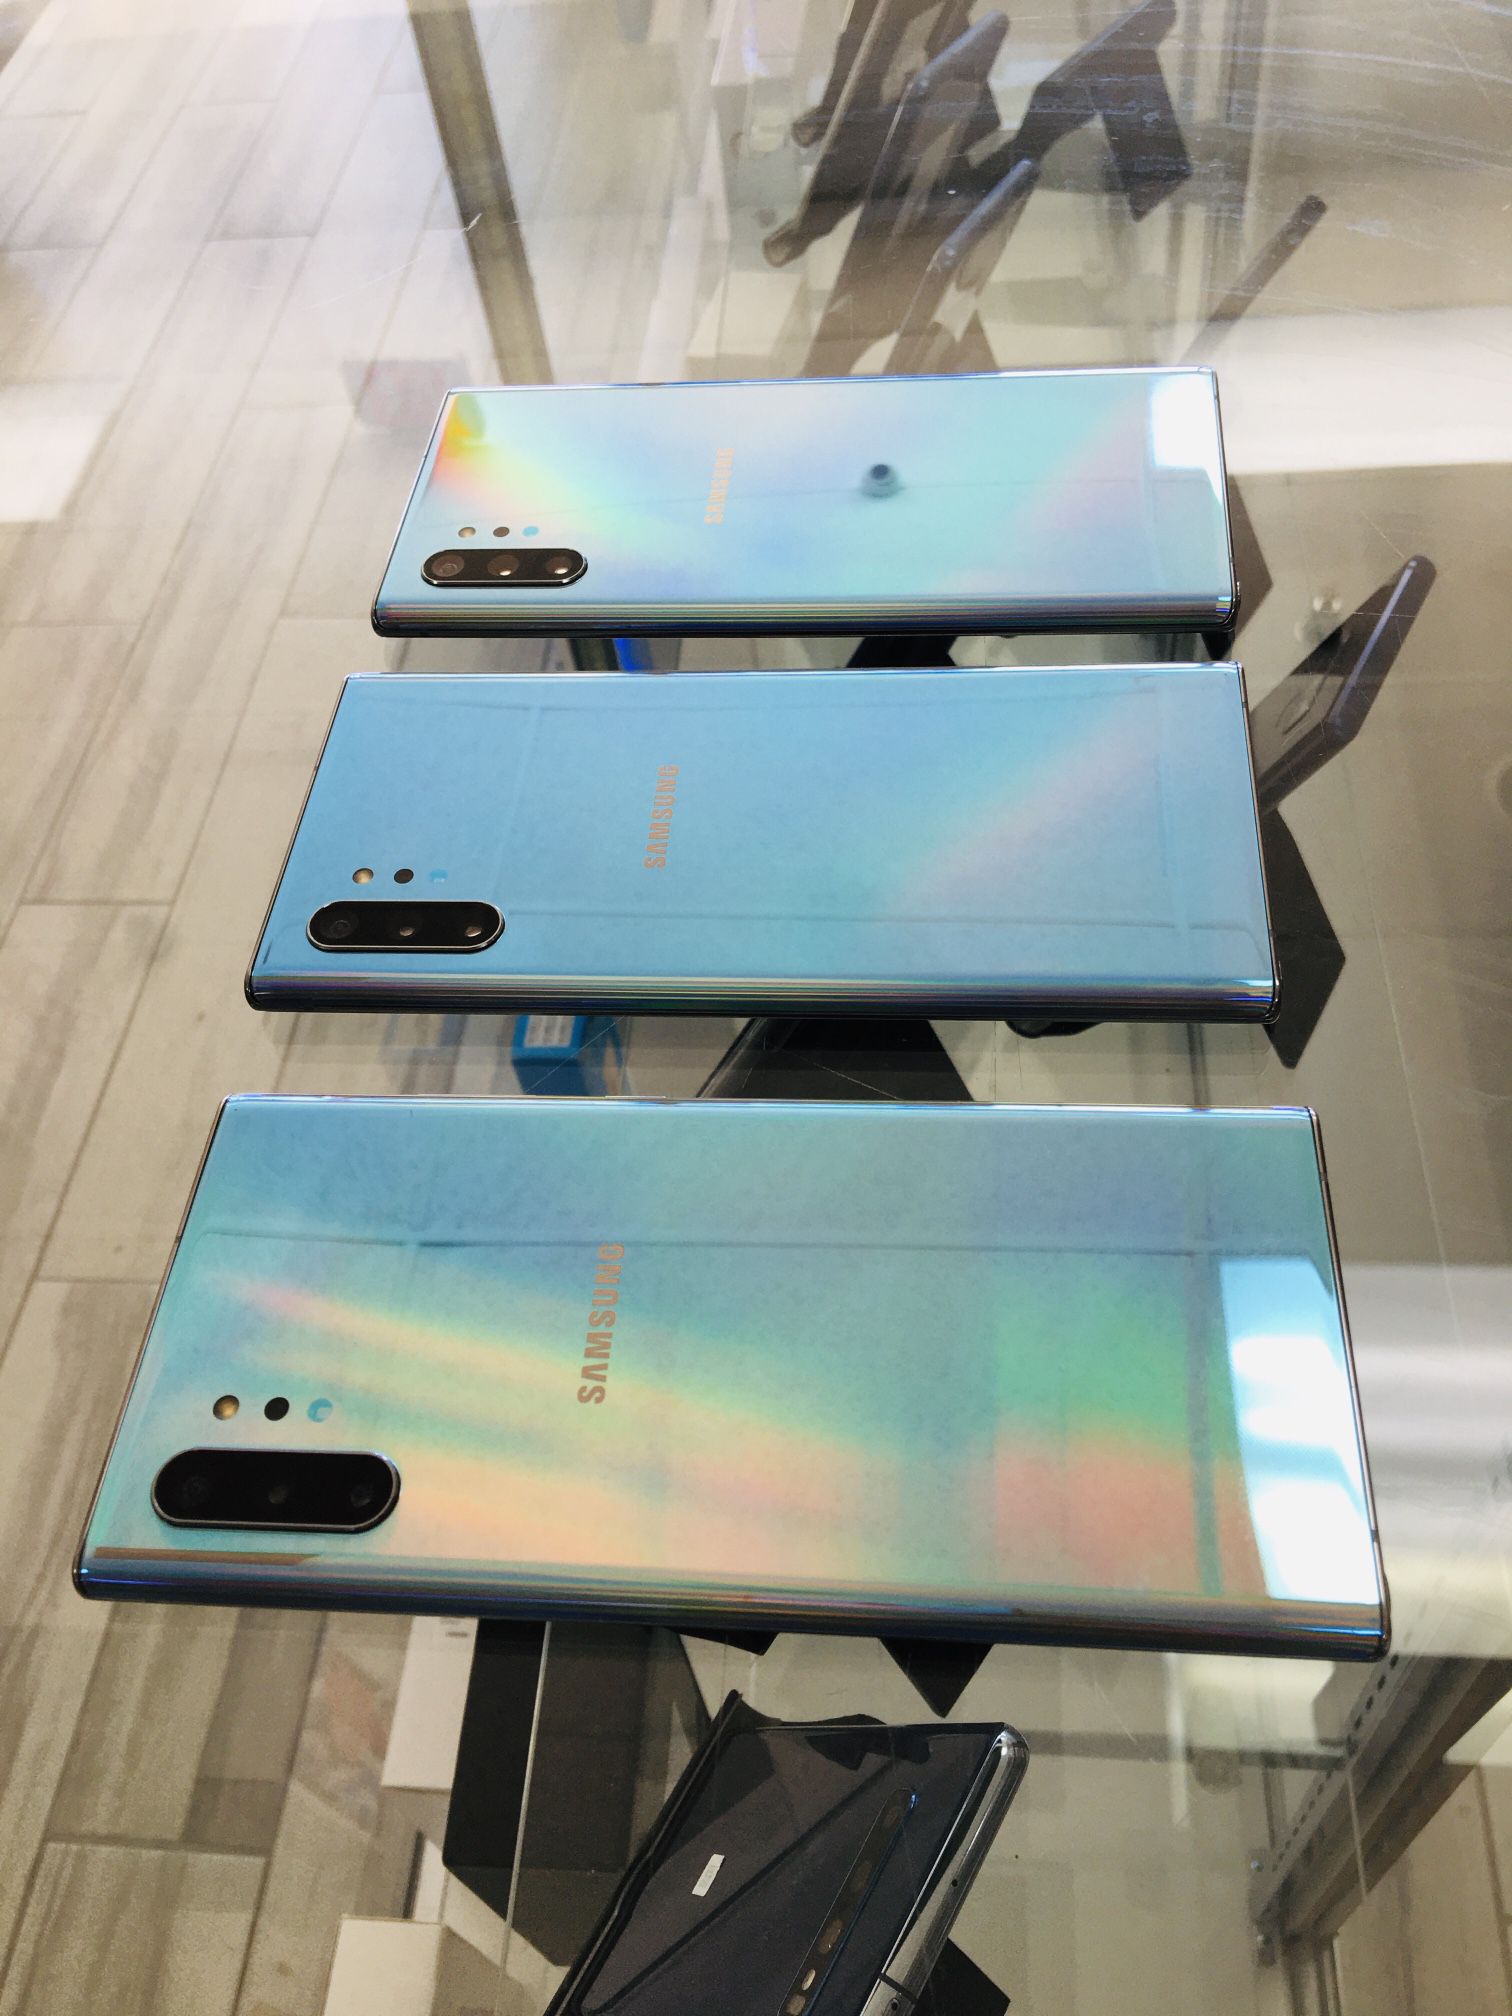 Samsung Galaxy Note 10+ Unlocked $779 Or As Low As $50 Down Payment